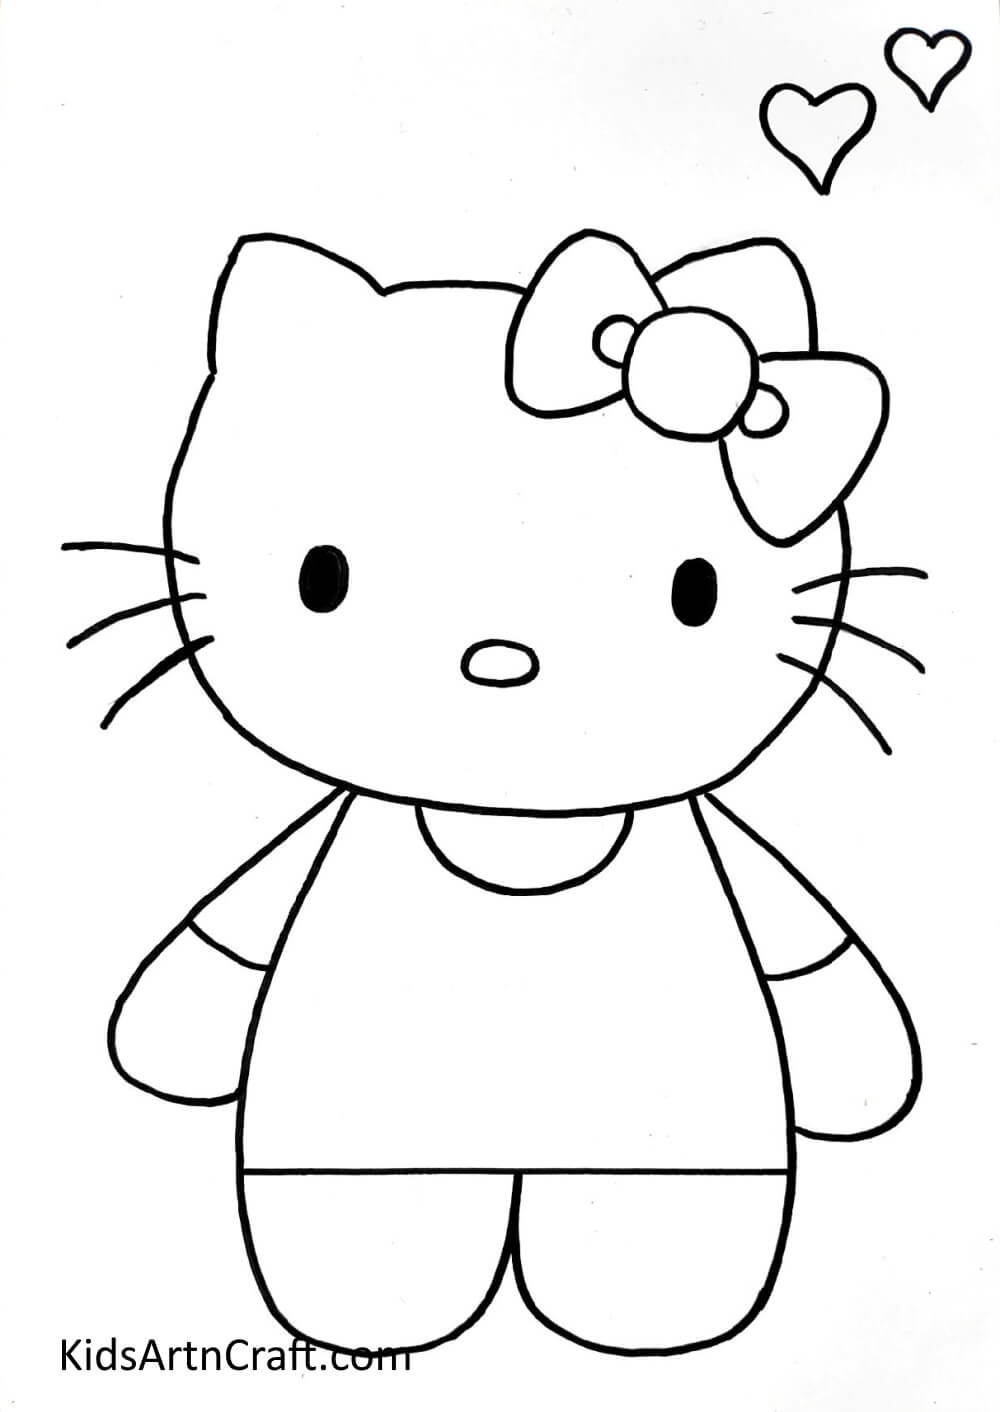 Drawing Kitten's Hand and Hearts - Arts and crafts project for children to draw a cuddly kitty at home.